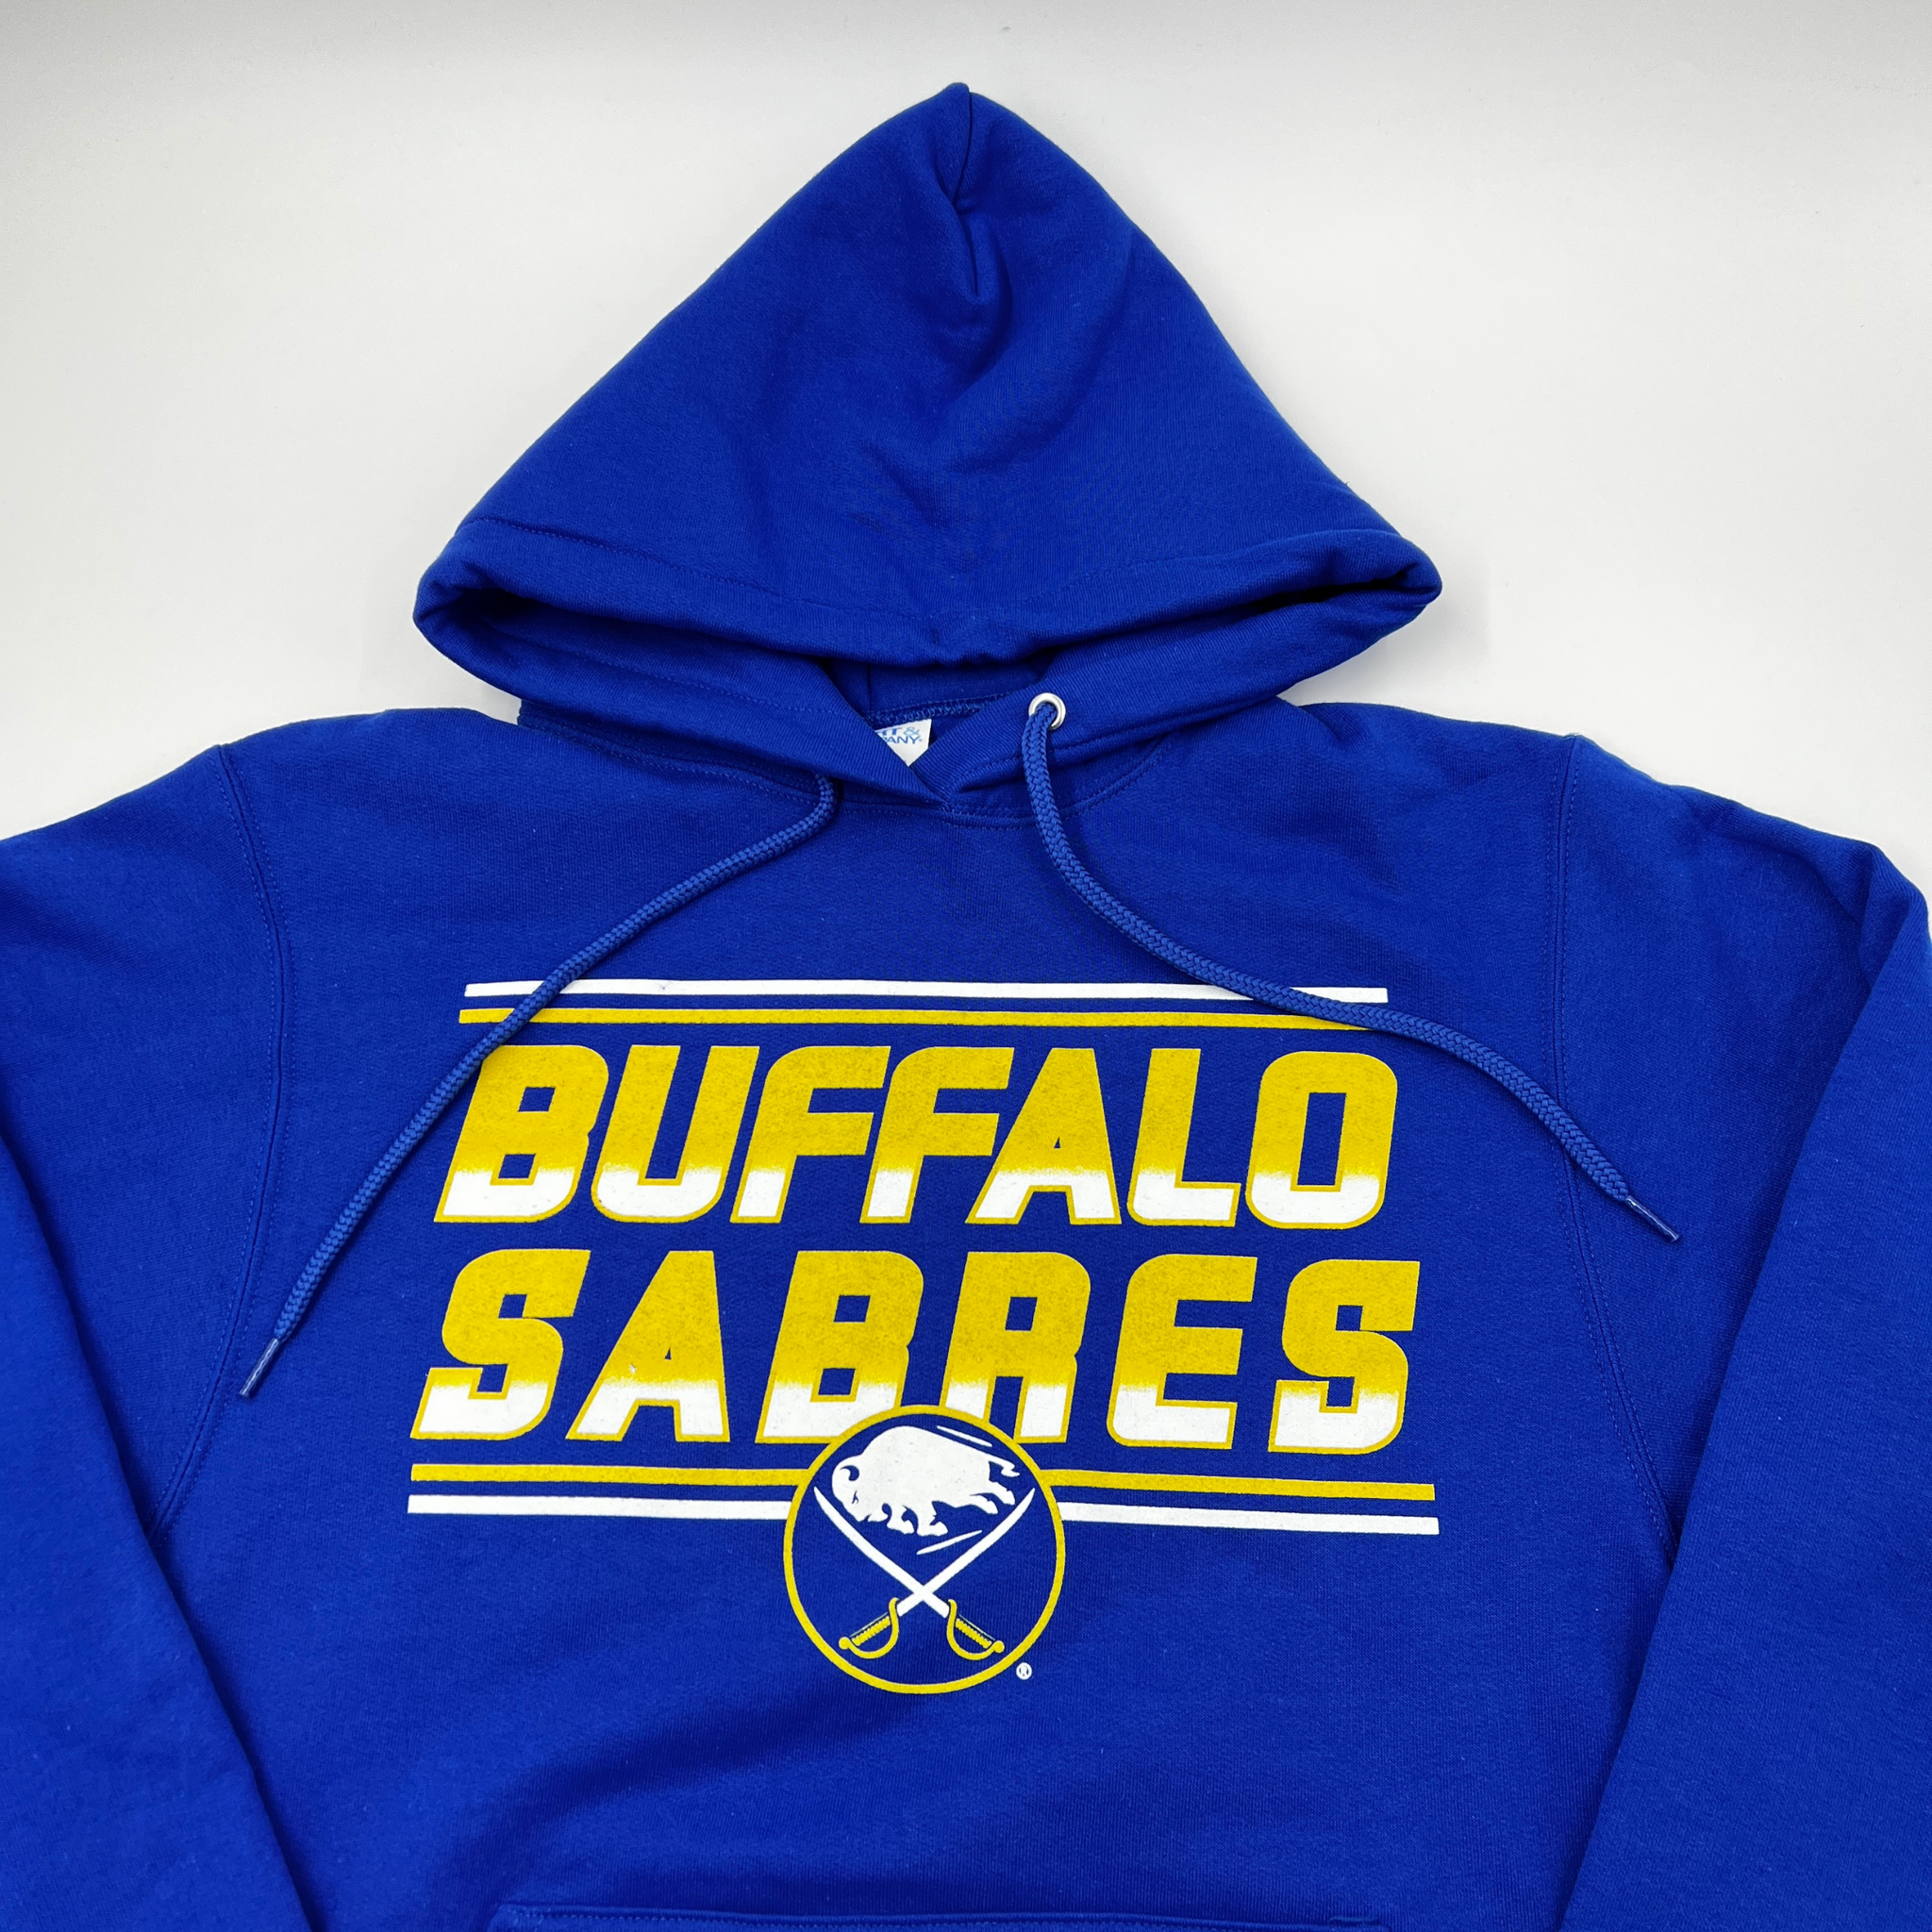 Shop Buffalo Sabres Clothing and Apparel The BFLO Store